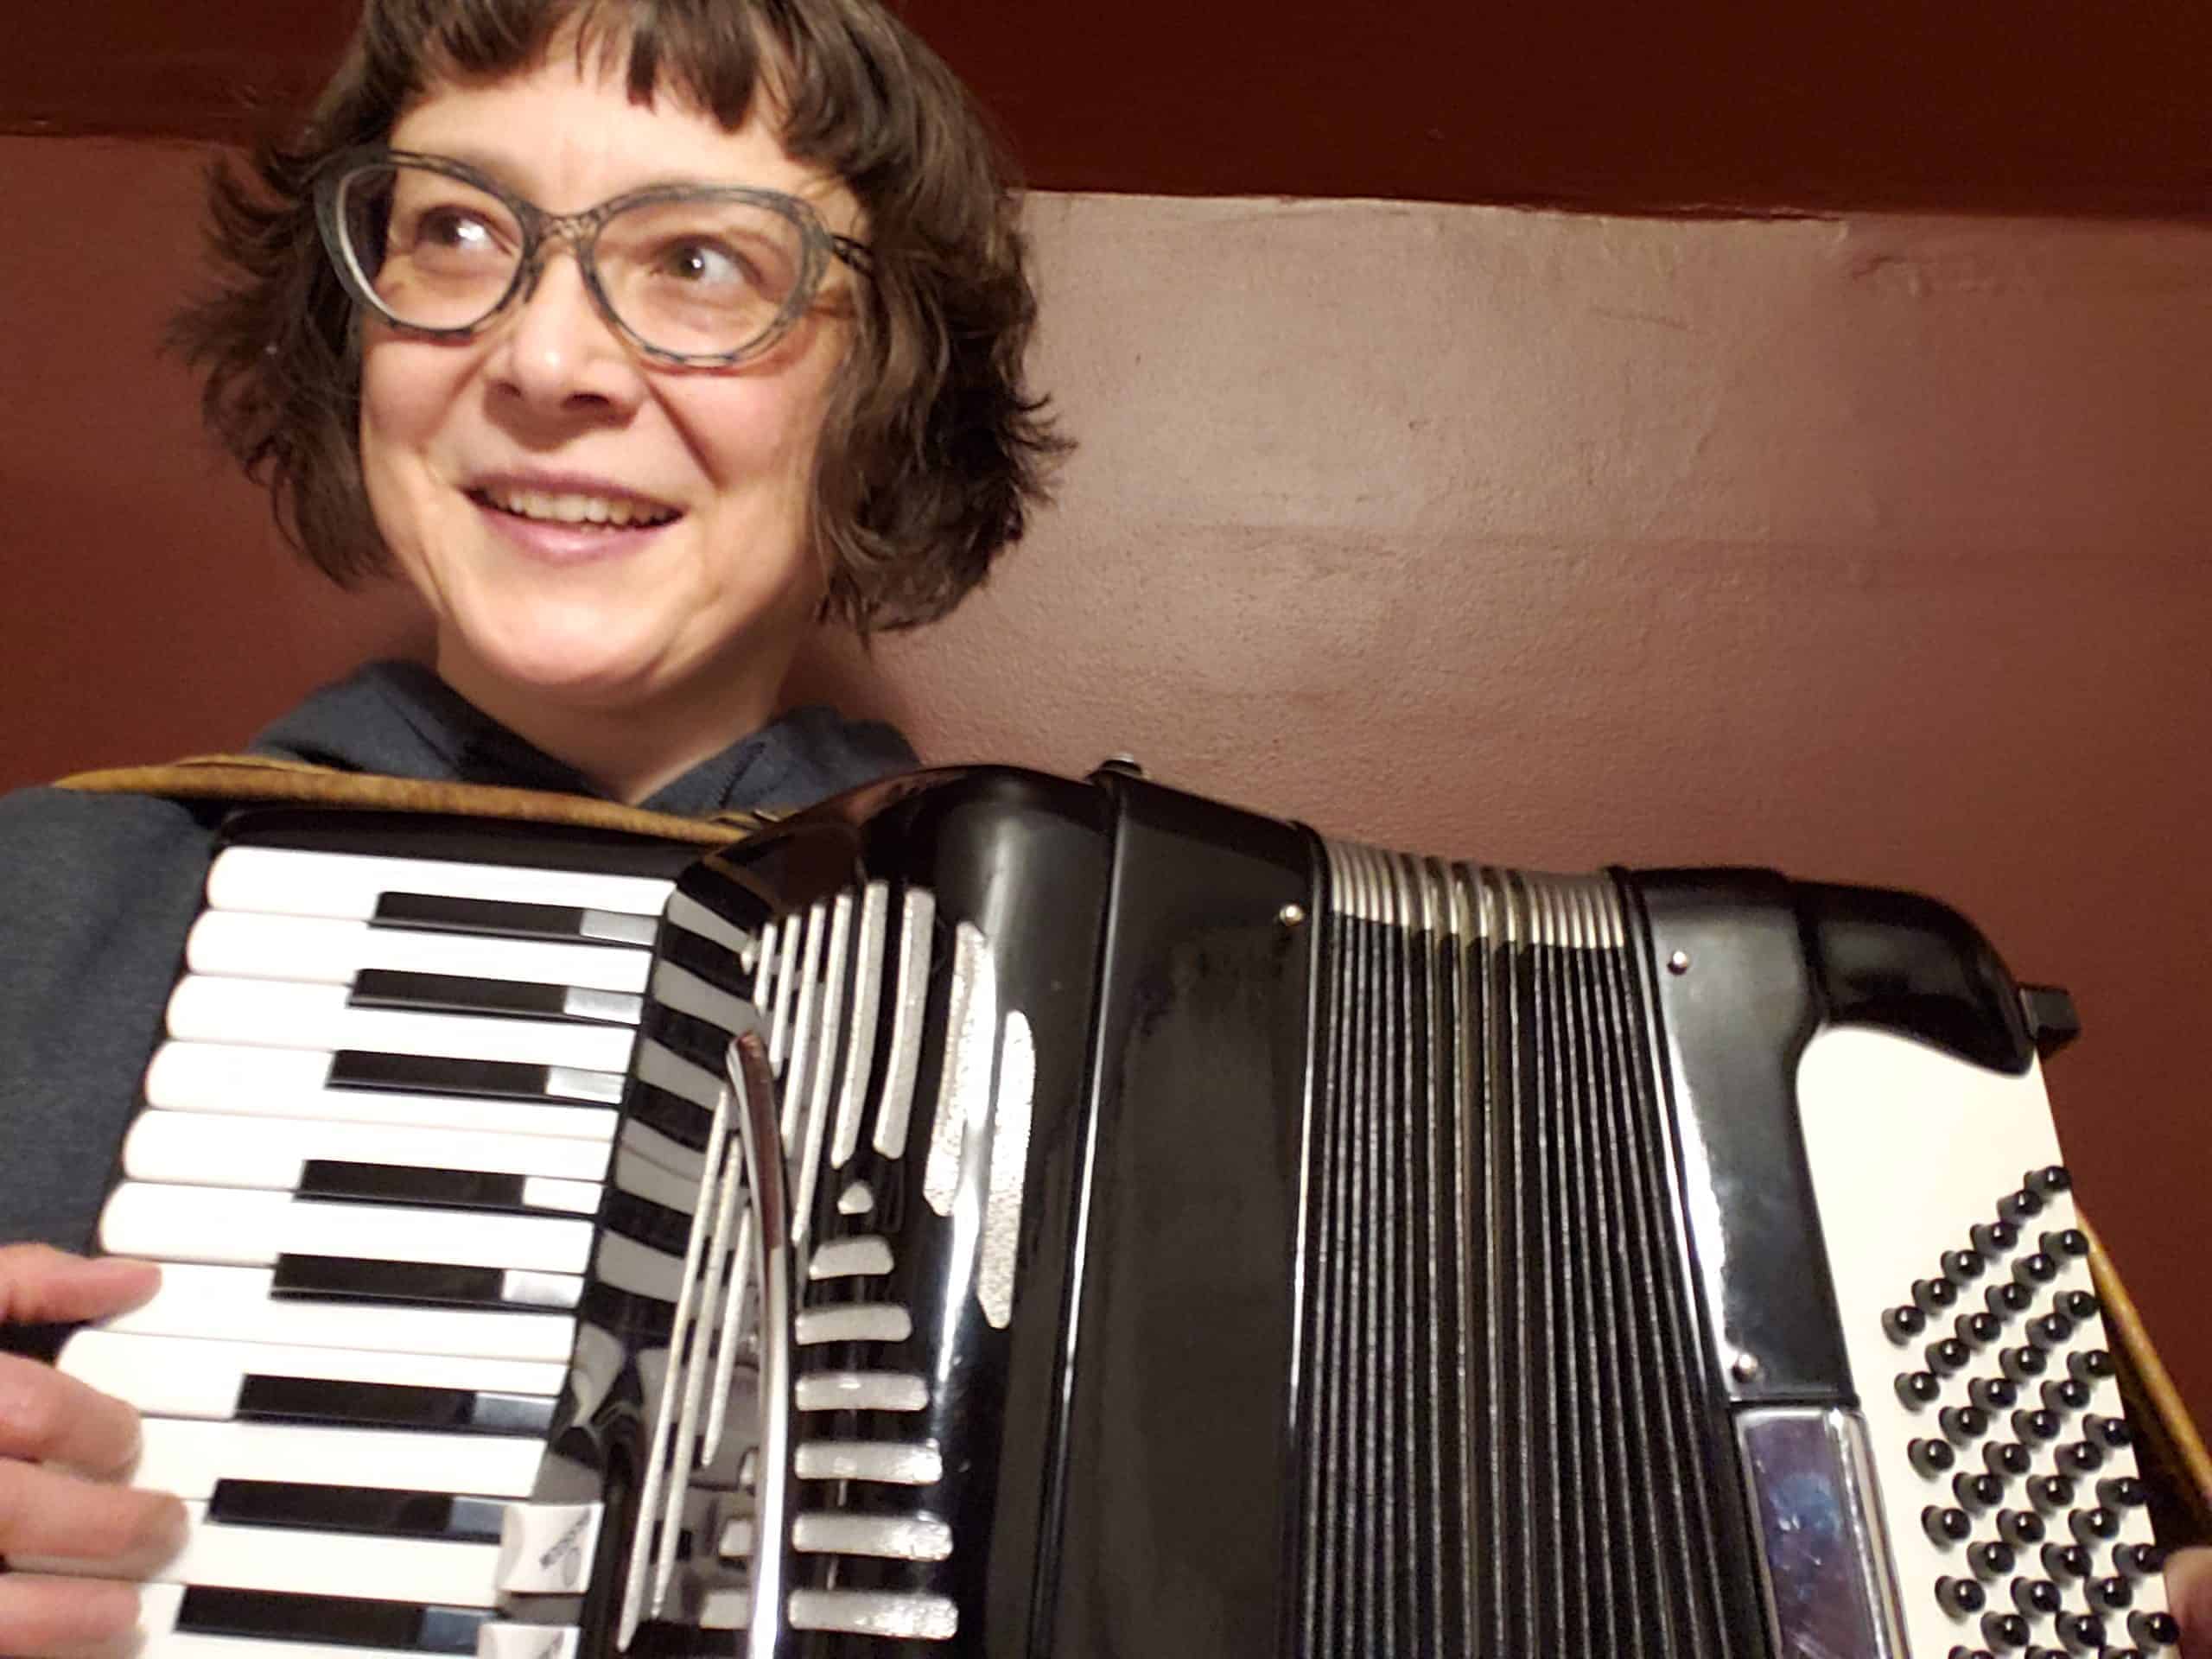 Share some music with accordion jam sessions